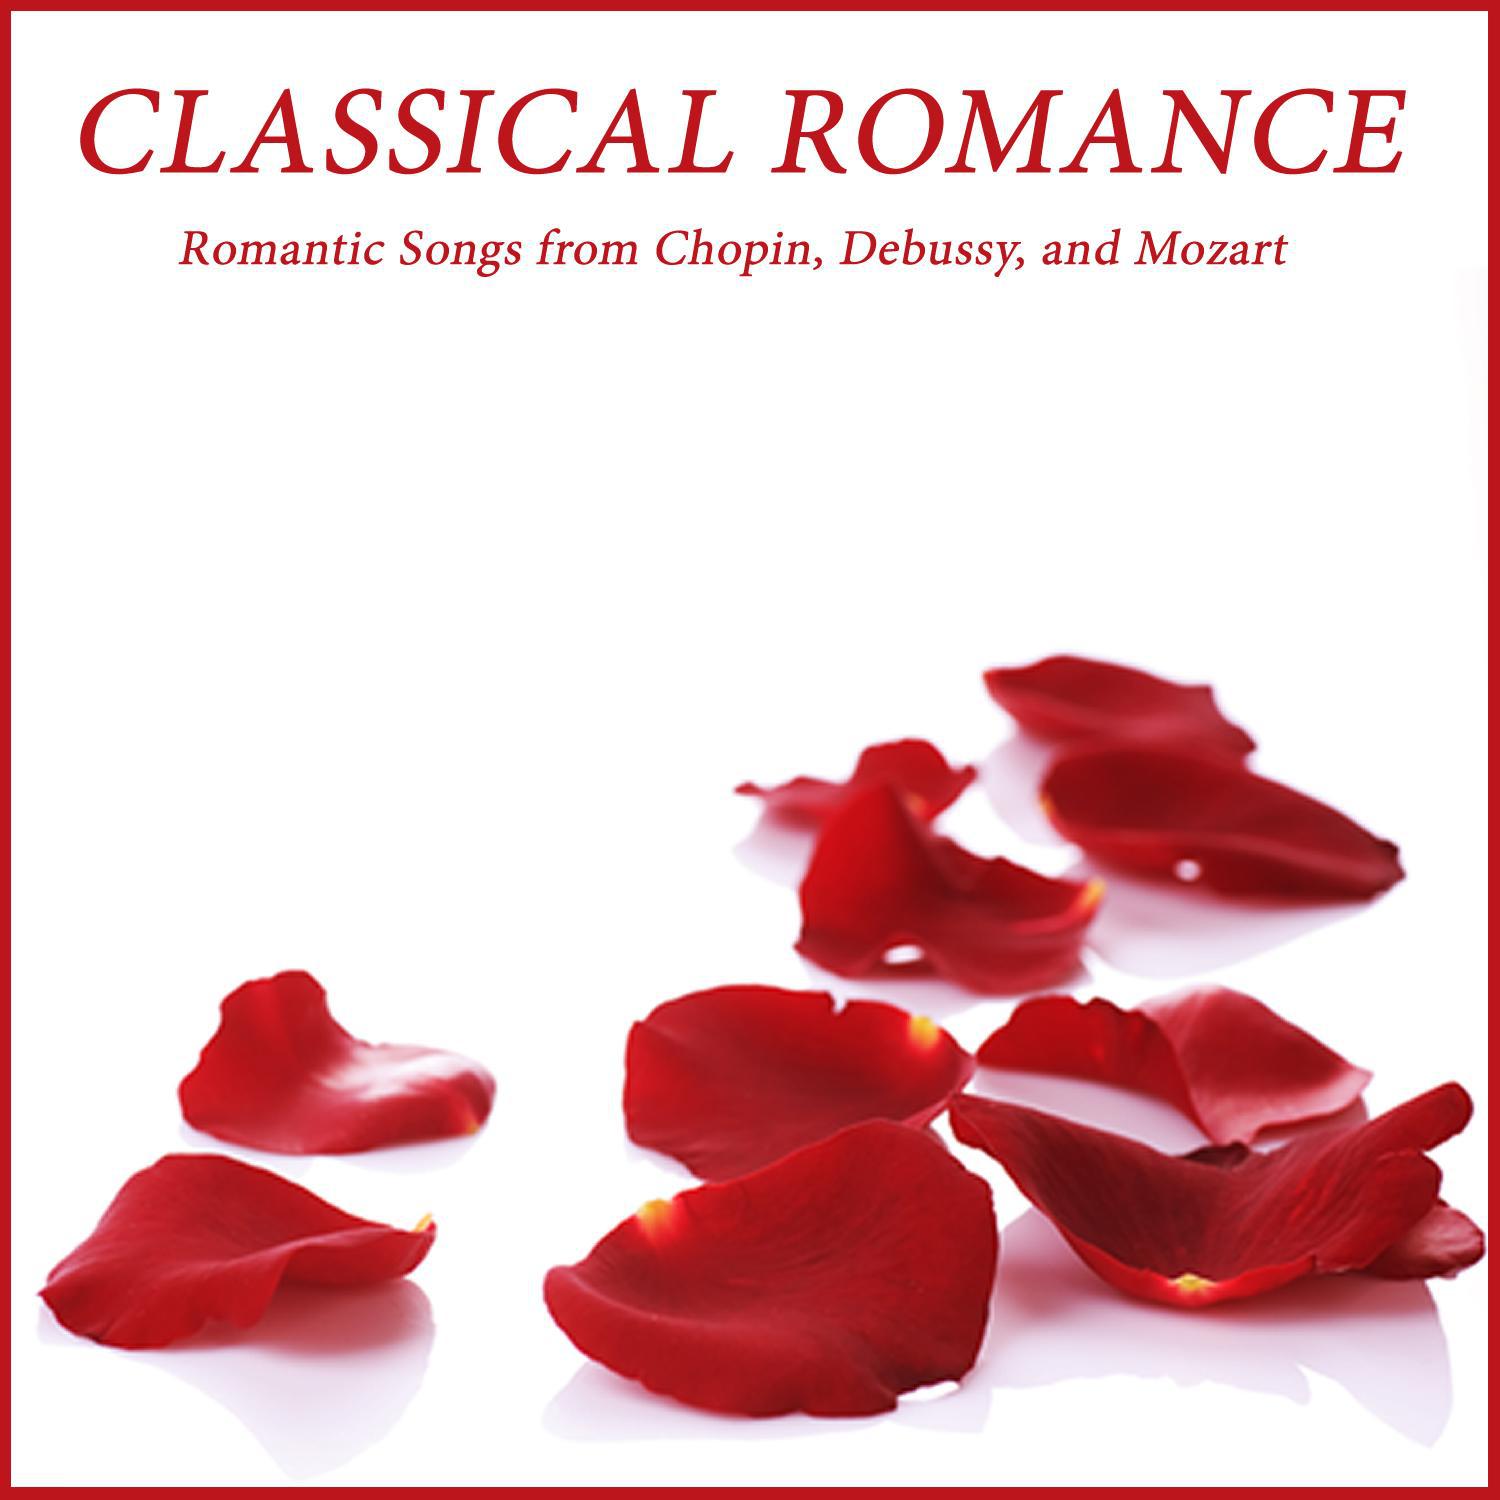 Classical Romance: Romantic Songs from Chopin, Debussy, and Mozart